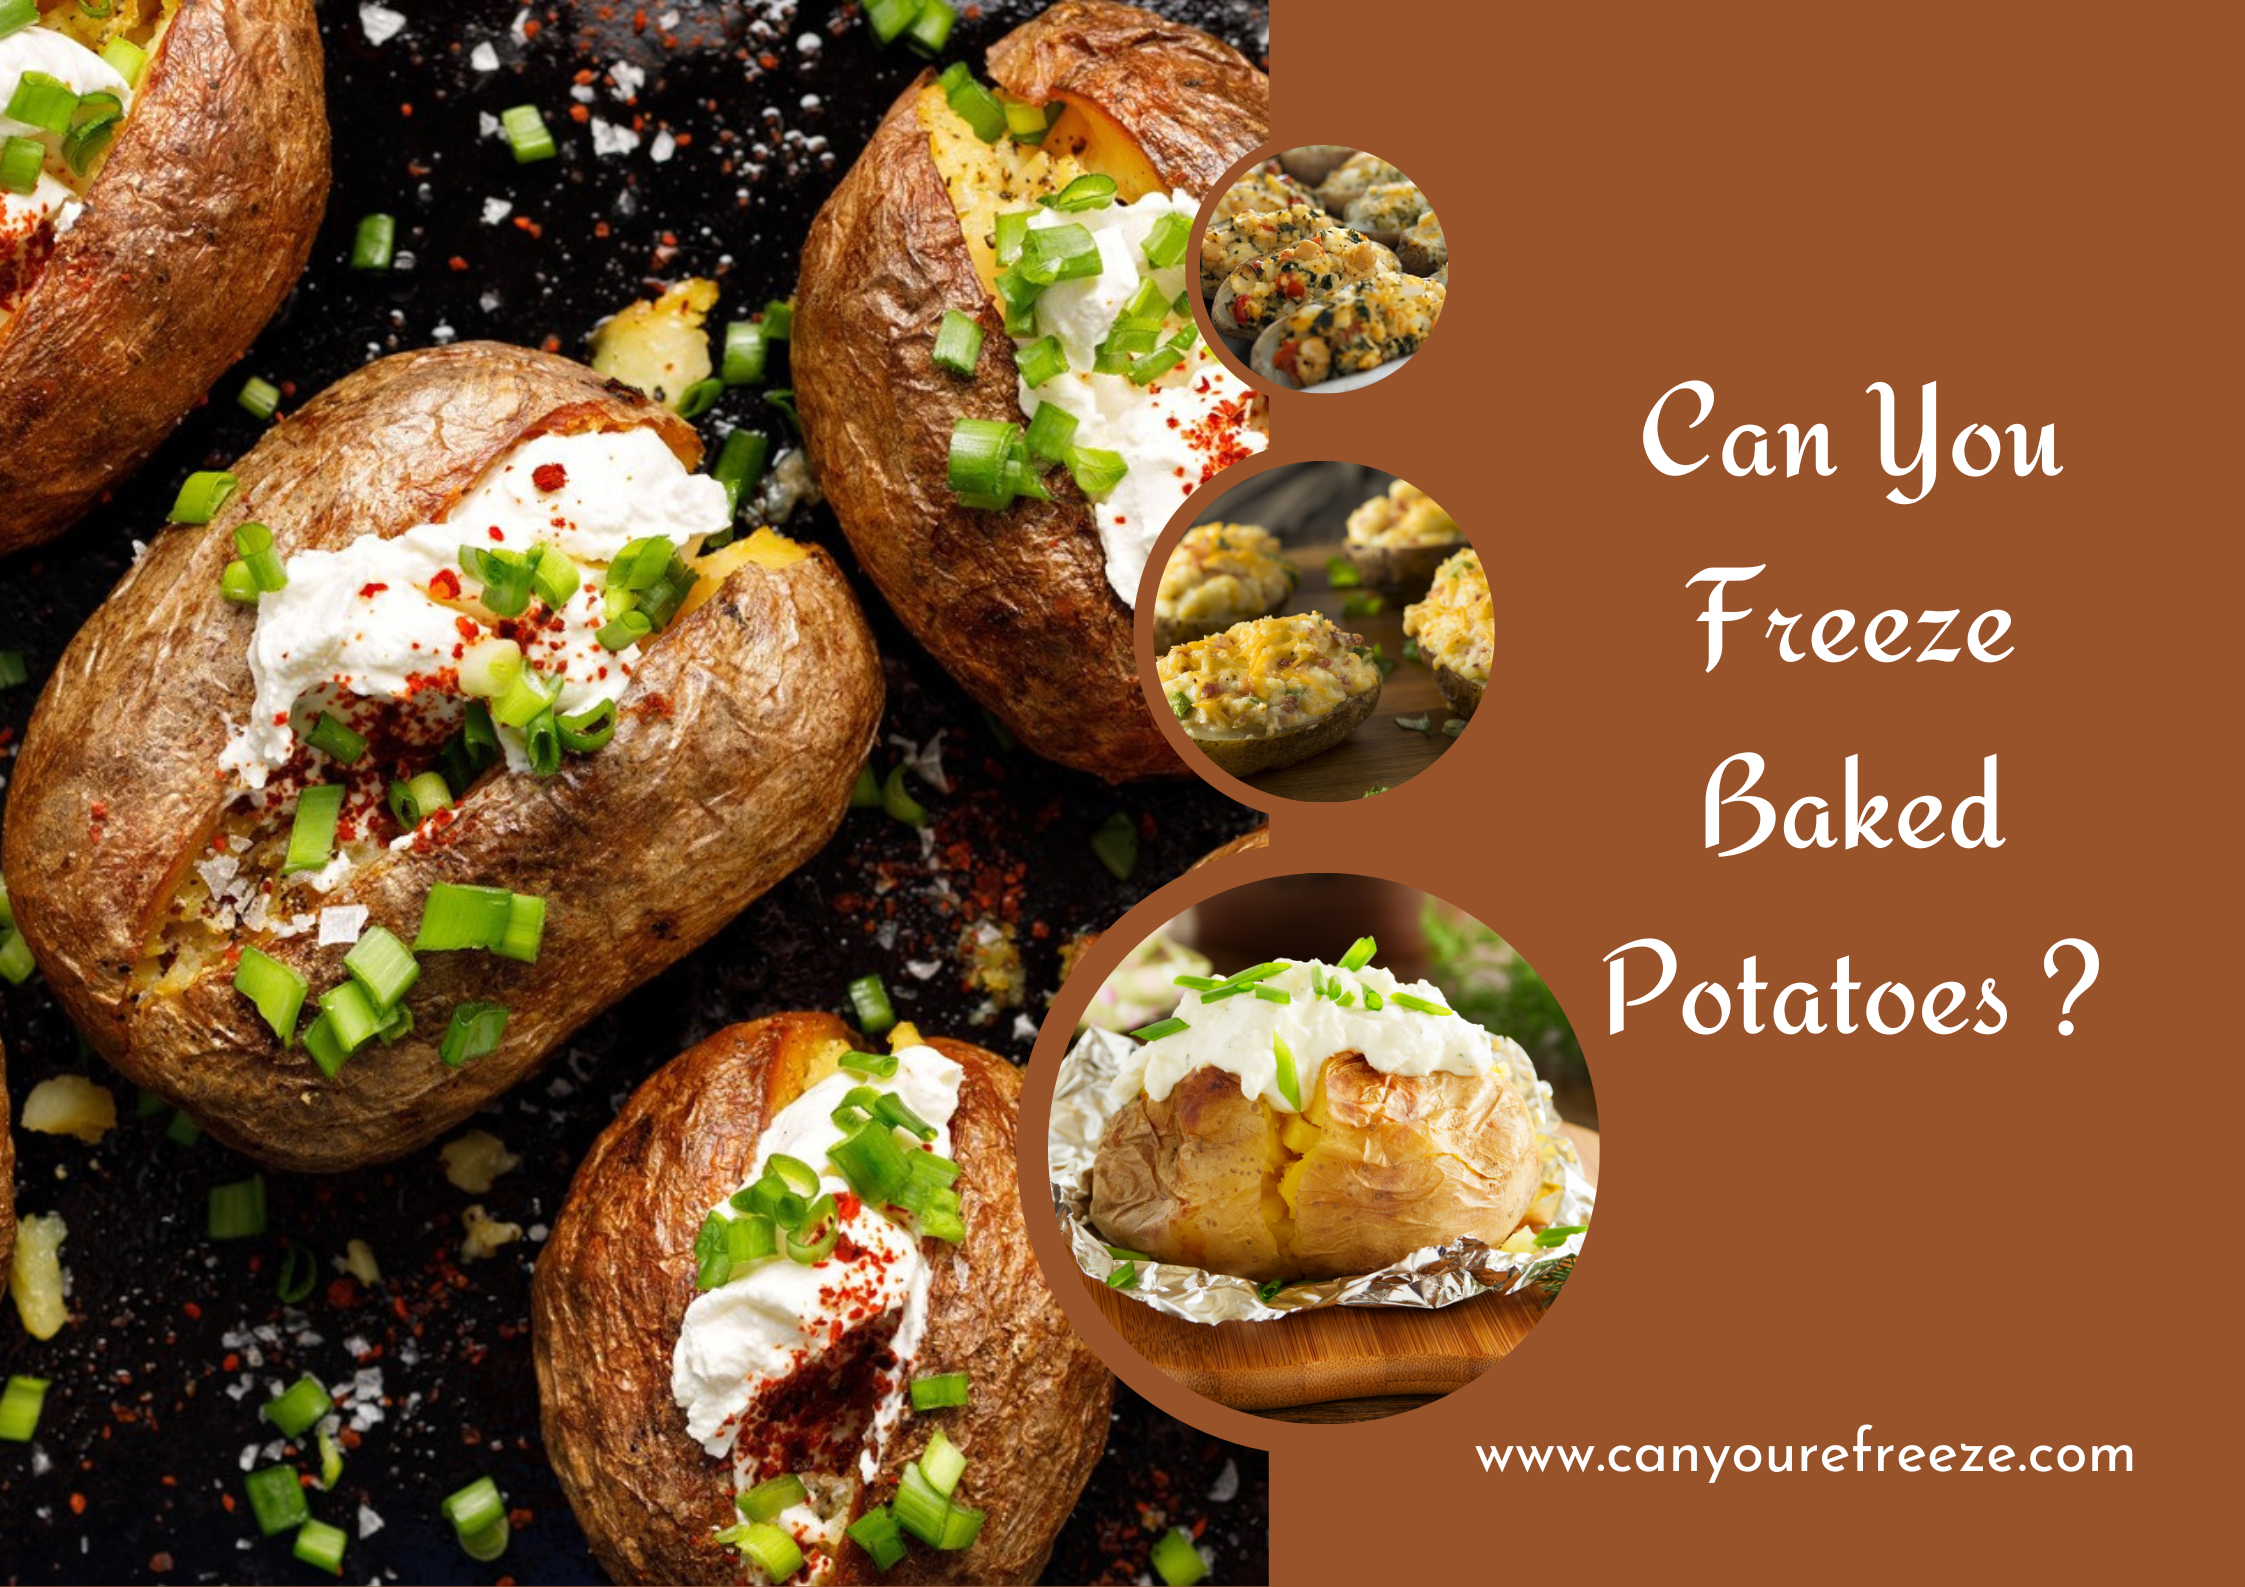 Can You Freeze Baked Potatoes